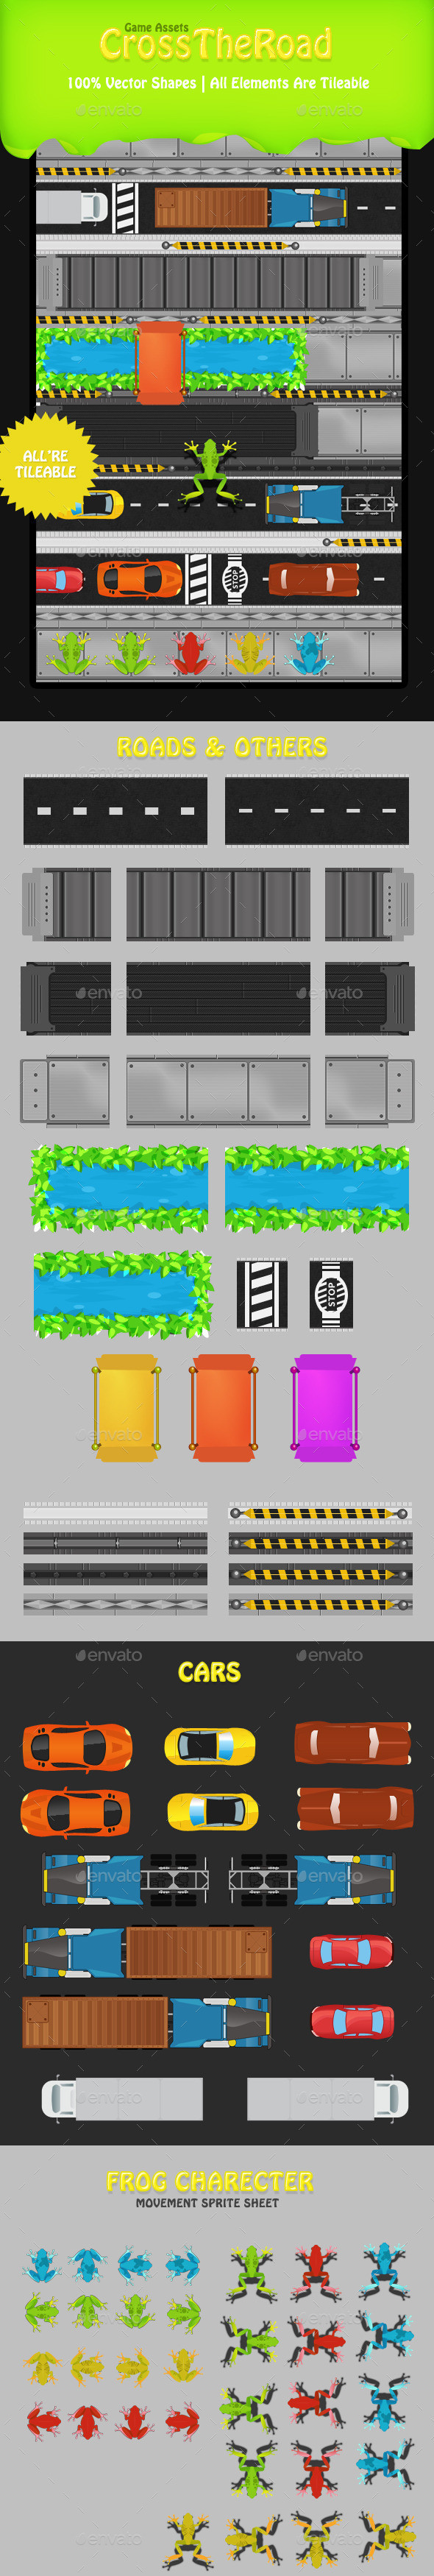 Cross the road frog game asset tileset preview